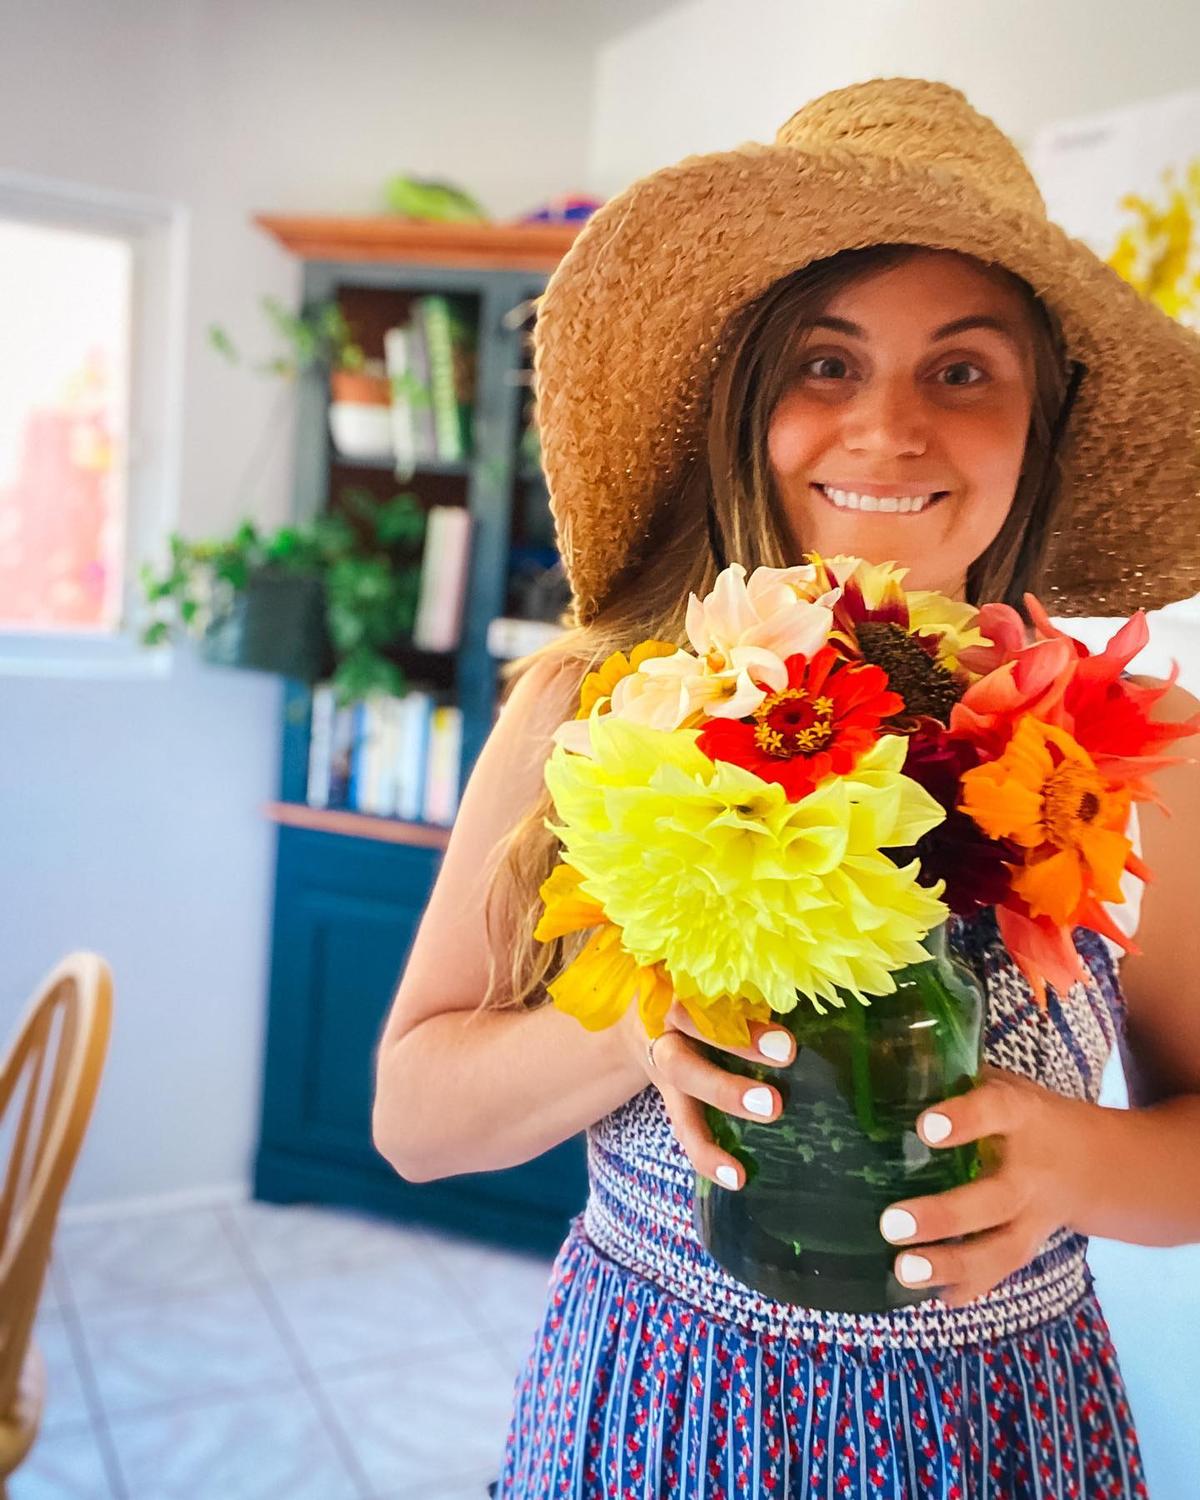 Taylor Raine Koutroumbis with a vase of flowers she grew in her garden. (Courtesy of <a href="https://www.instagram.com/mykidsaredirtyagain/">Taylor Raine</a>)